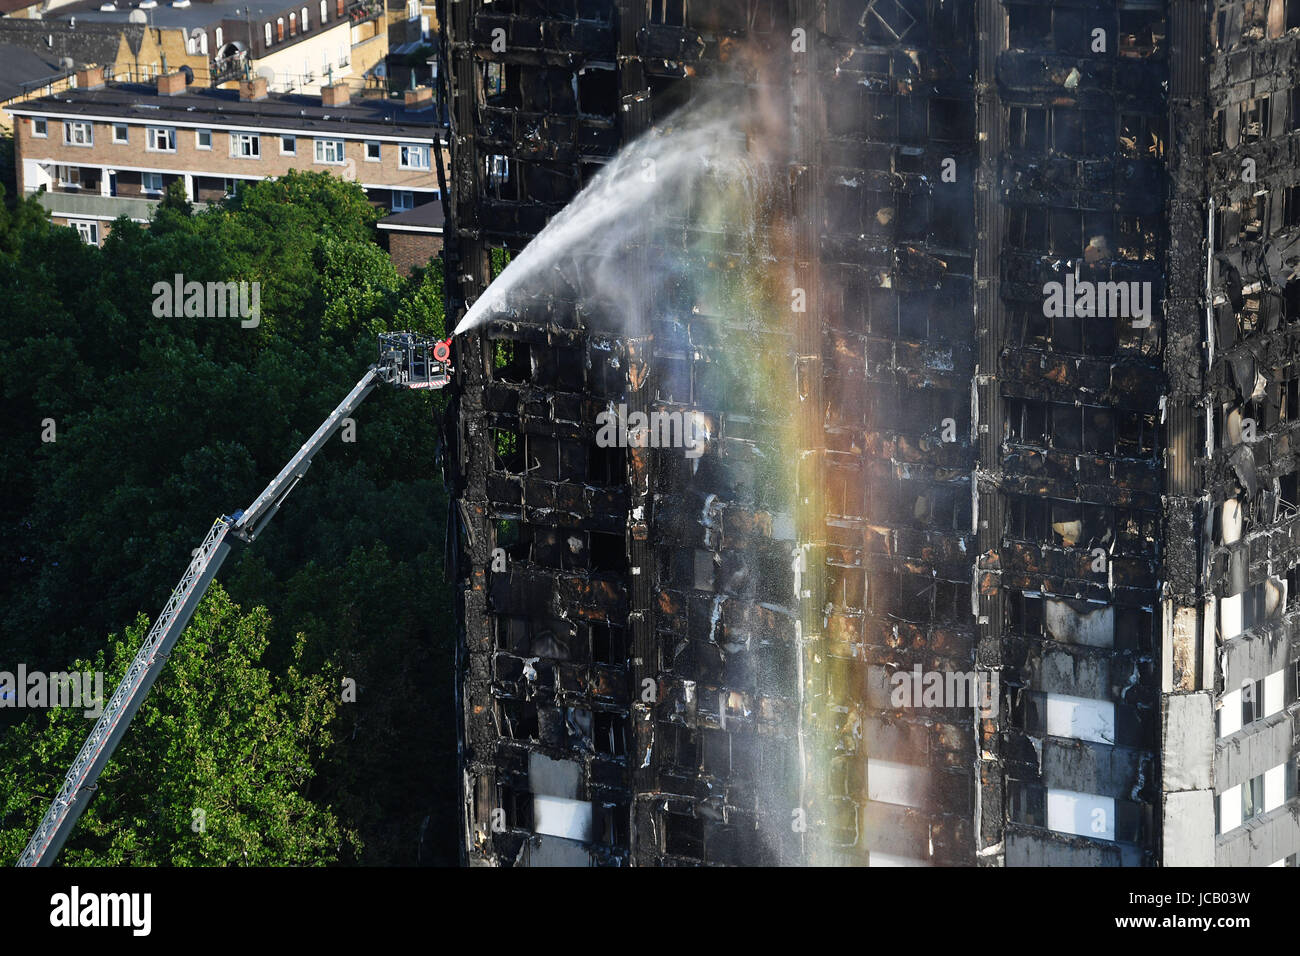 Firefighters spray water after a fire engulfed the 24-storey Grenfell Tower in west London. Stock Photo